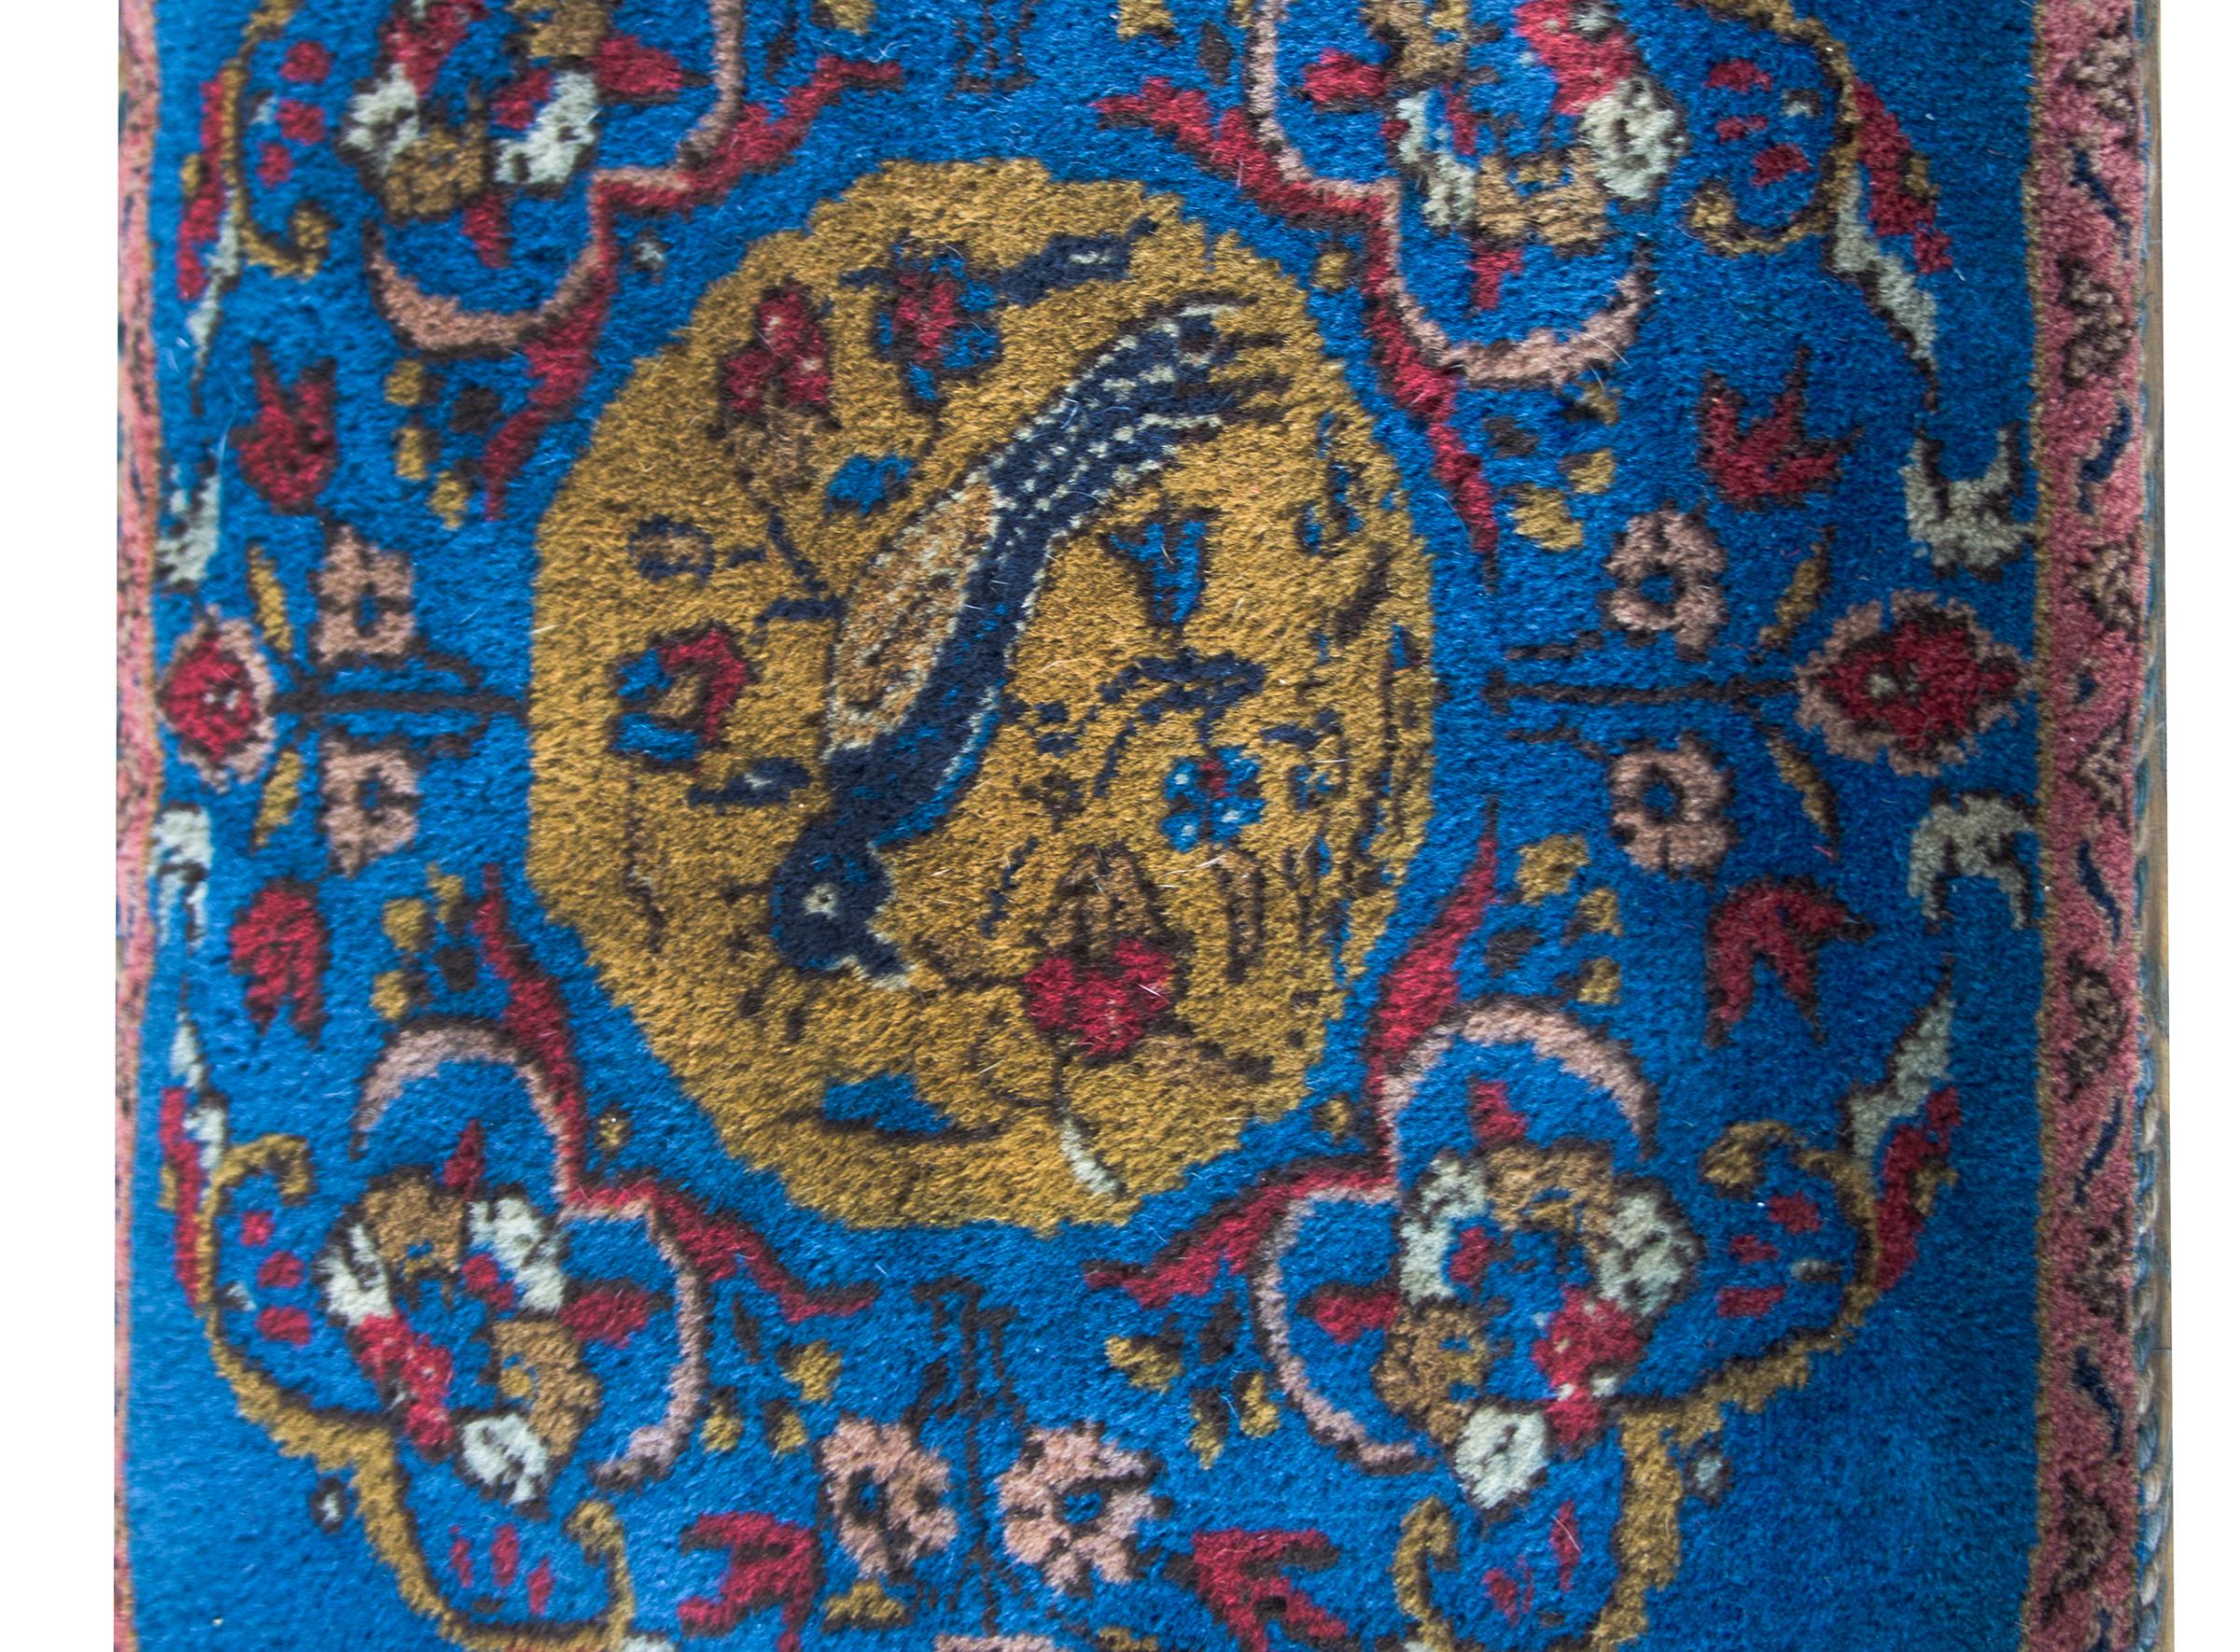 A charming late 20th century Afghani floor pillow hand-woven with a central medallion with a bird and flowers surrounded by scrolling vines and flowers.